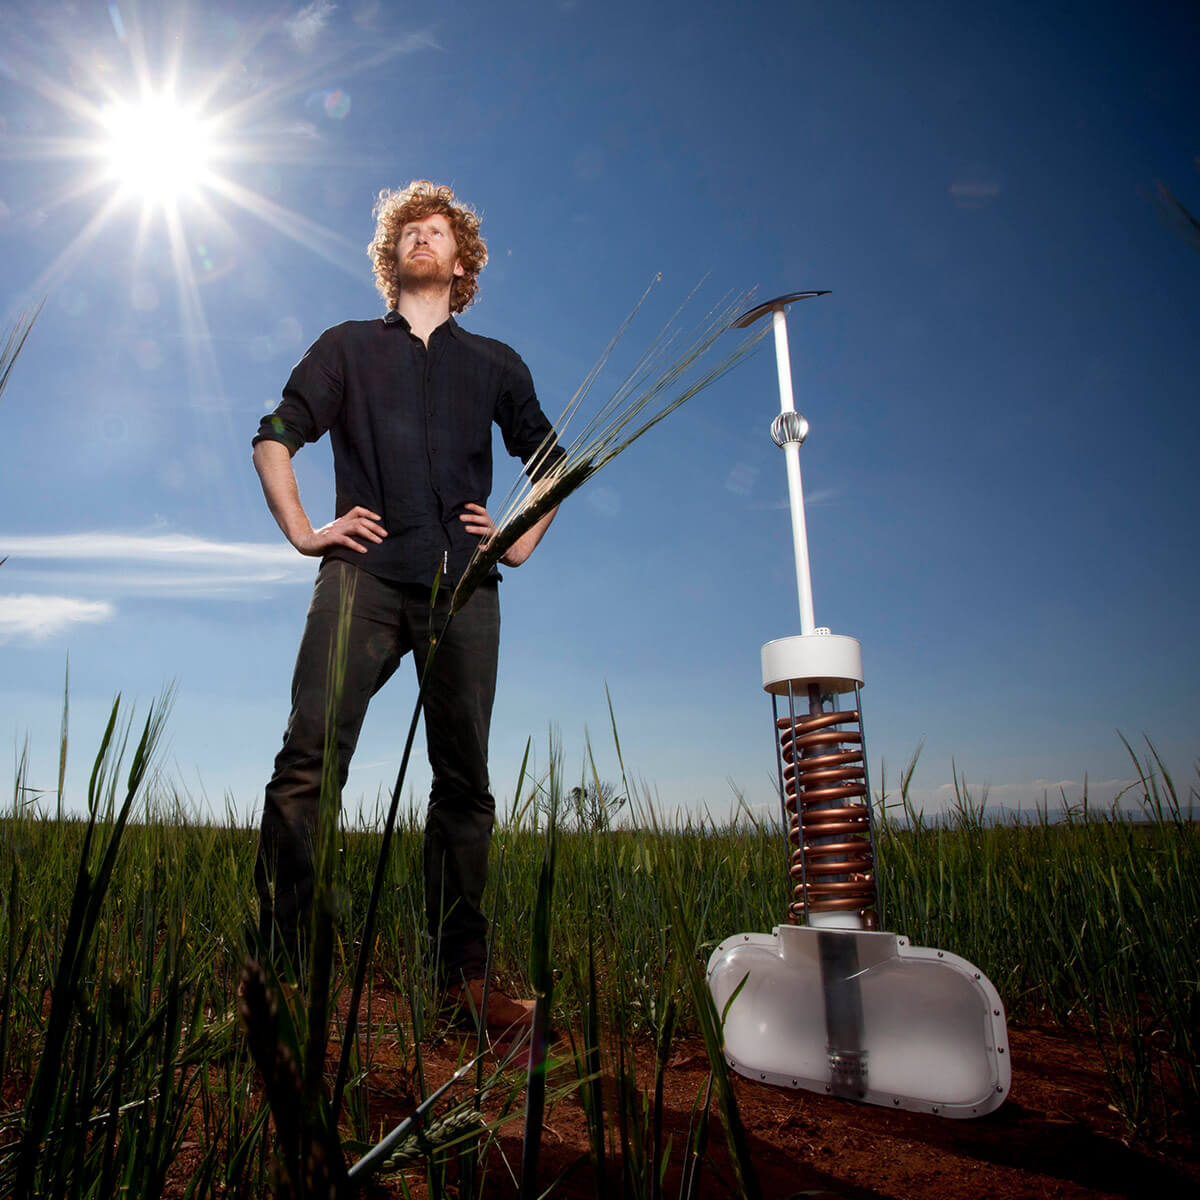 2011 international winner of the James Dyson Award, Edward Linacre, with his invention Airdrop.